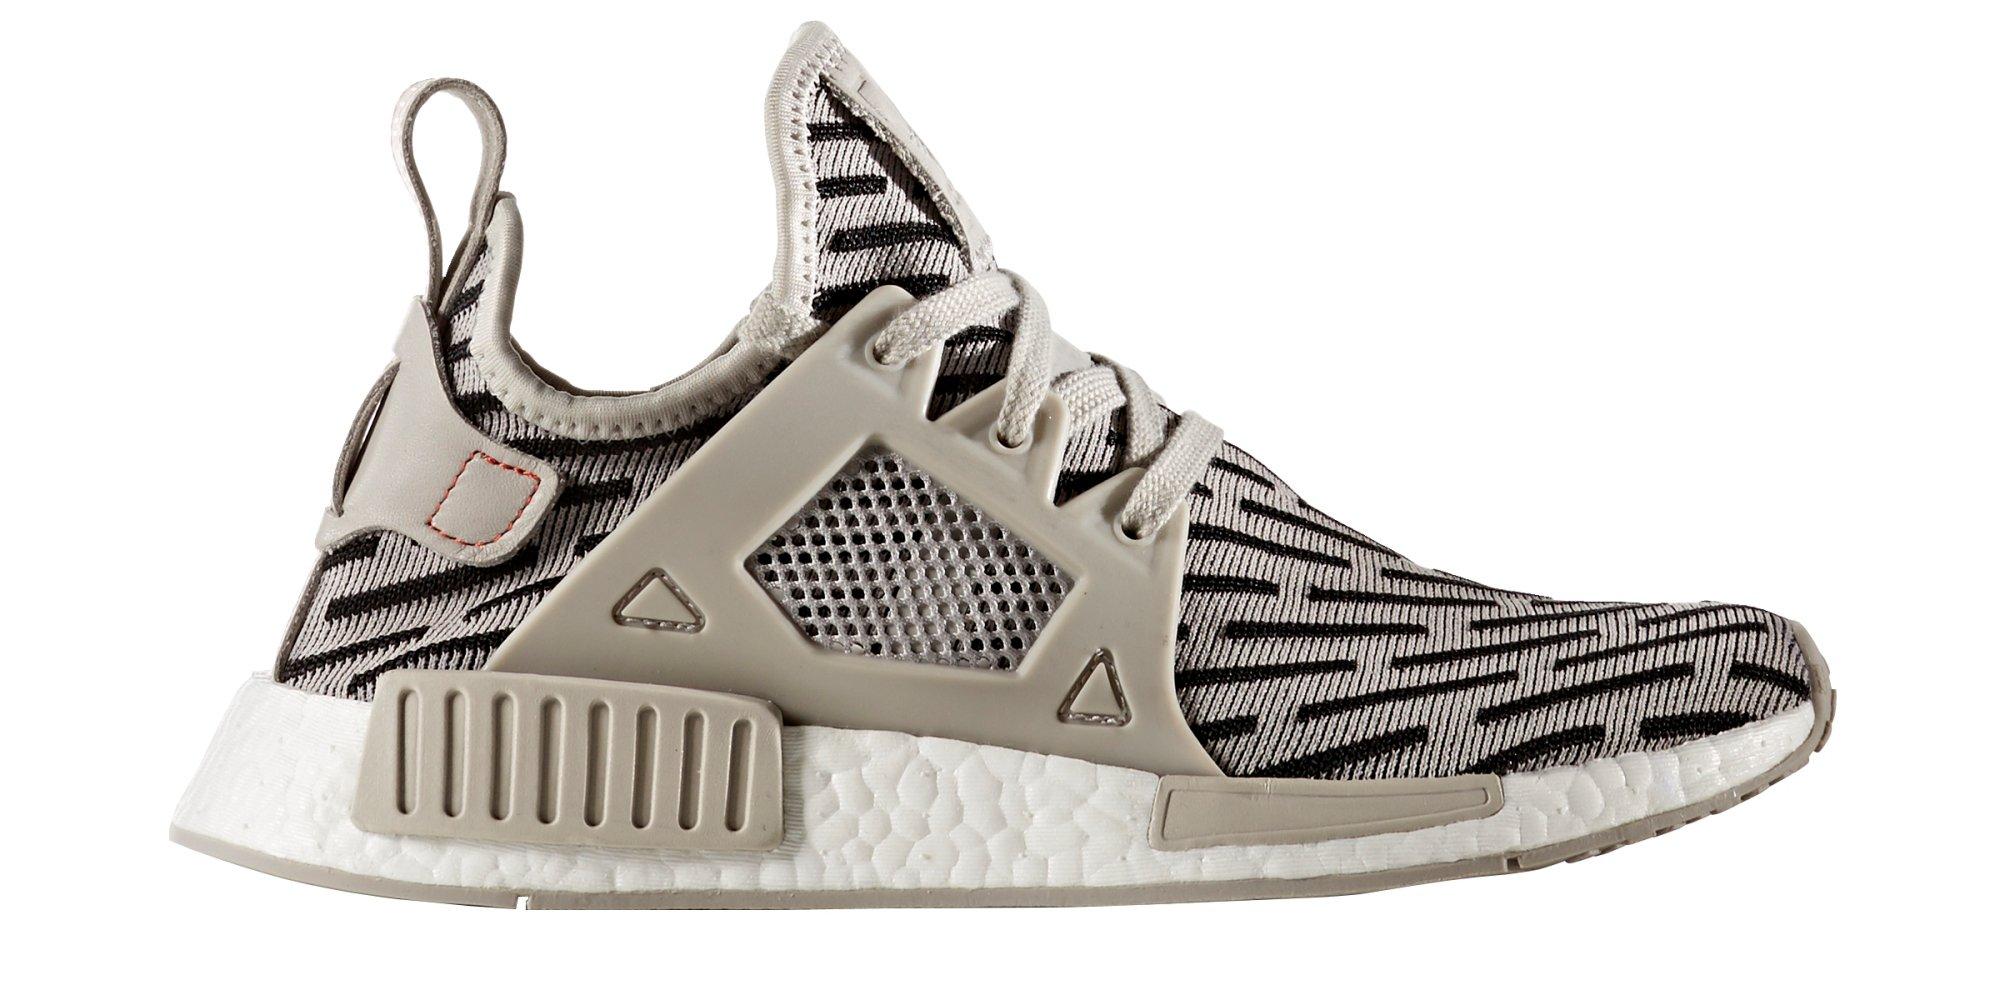 How to Customized Adidas NMD XR1 YouTube